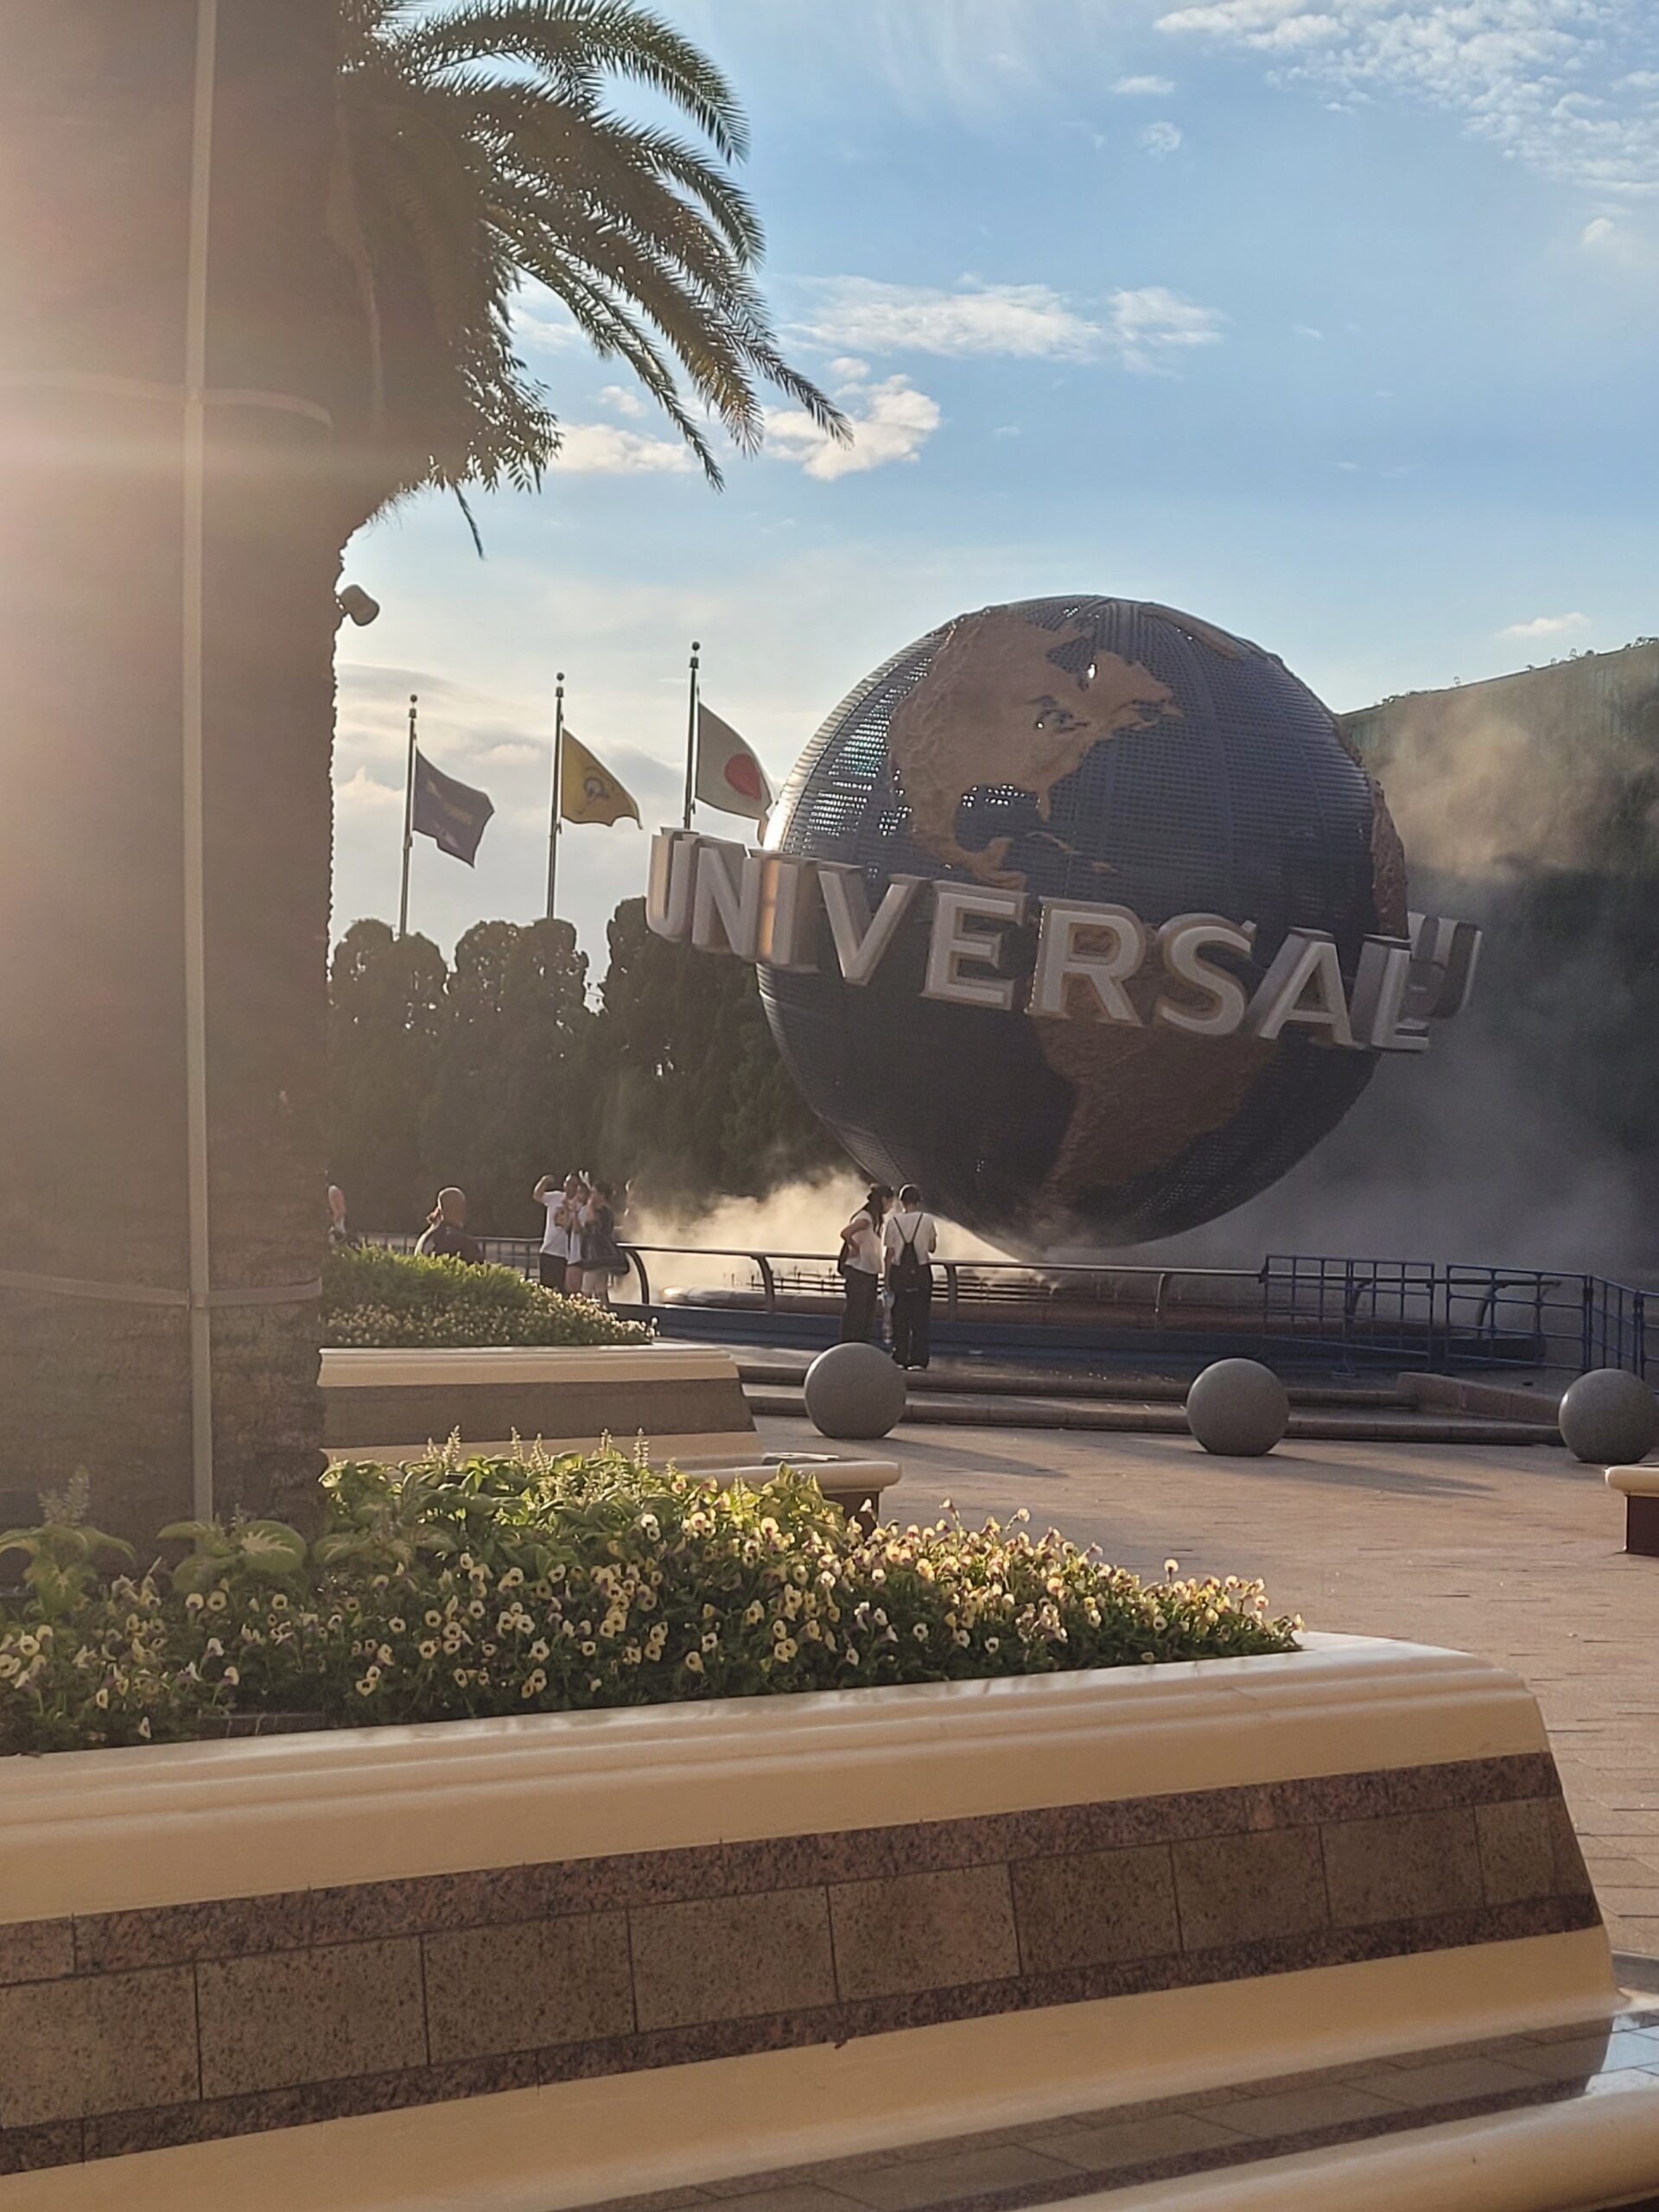 5 reasons to visit Universal Studios Japan even without a ticket